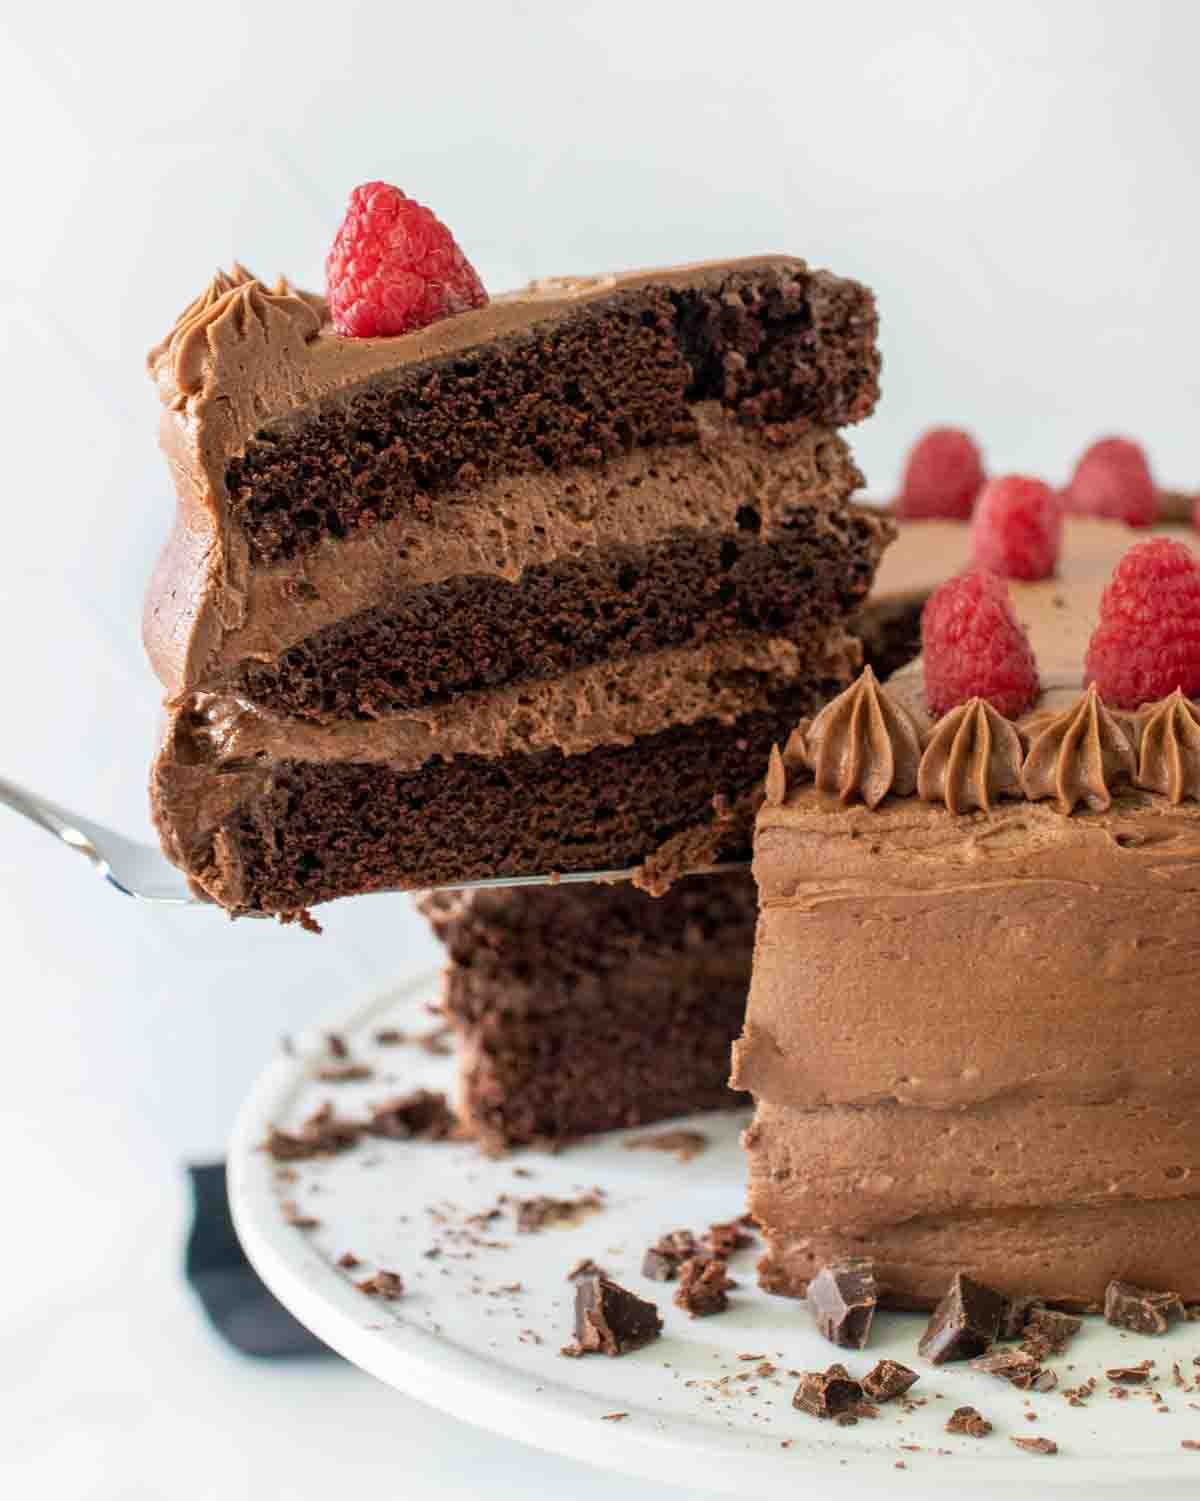 slice of chocolate mousse cake being taken out of whole cake